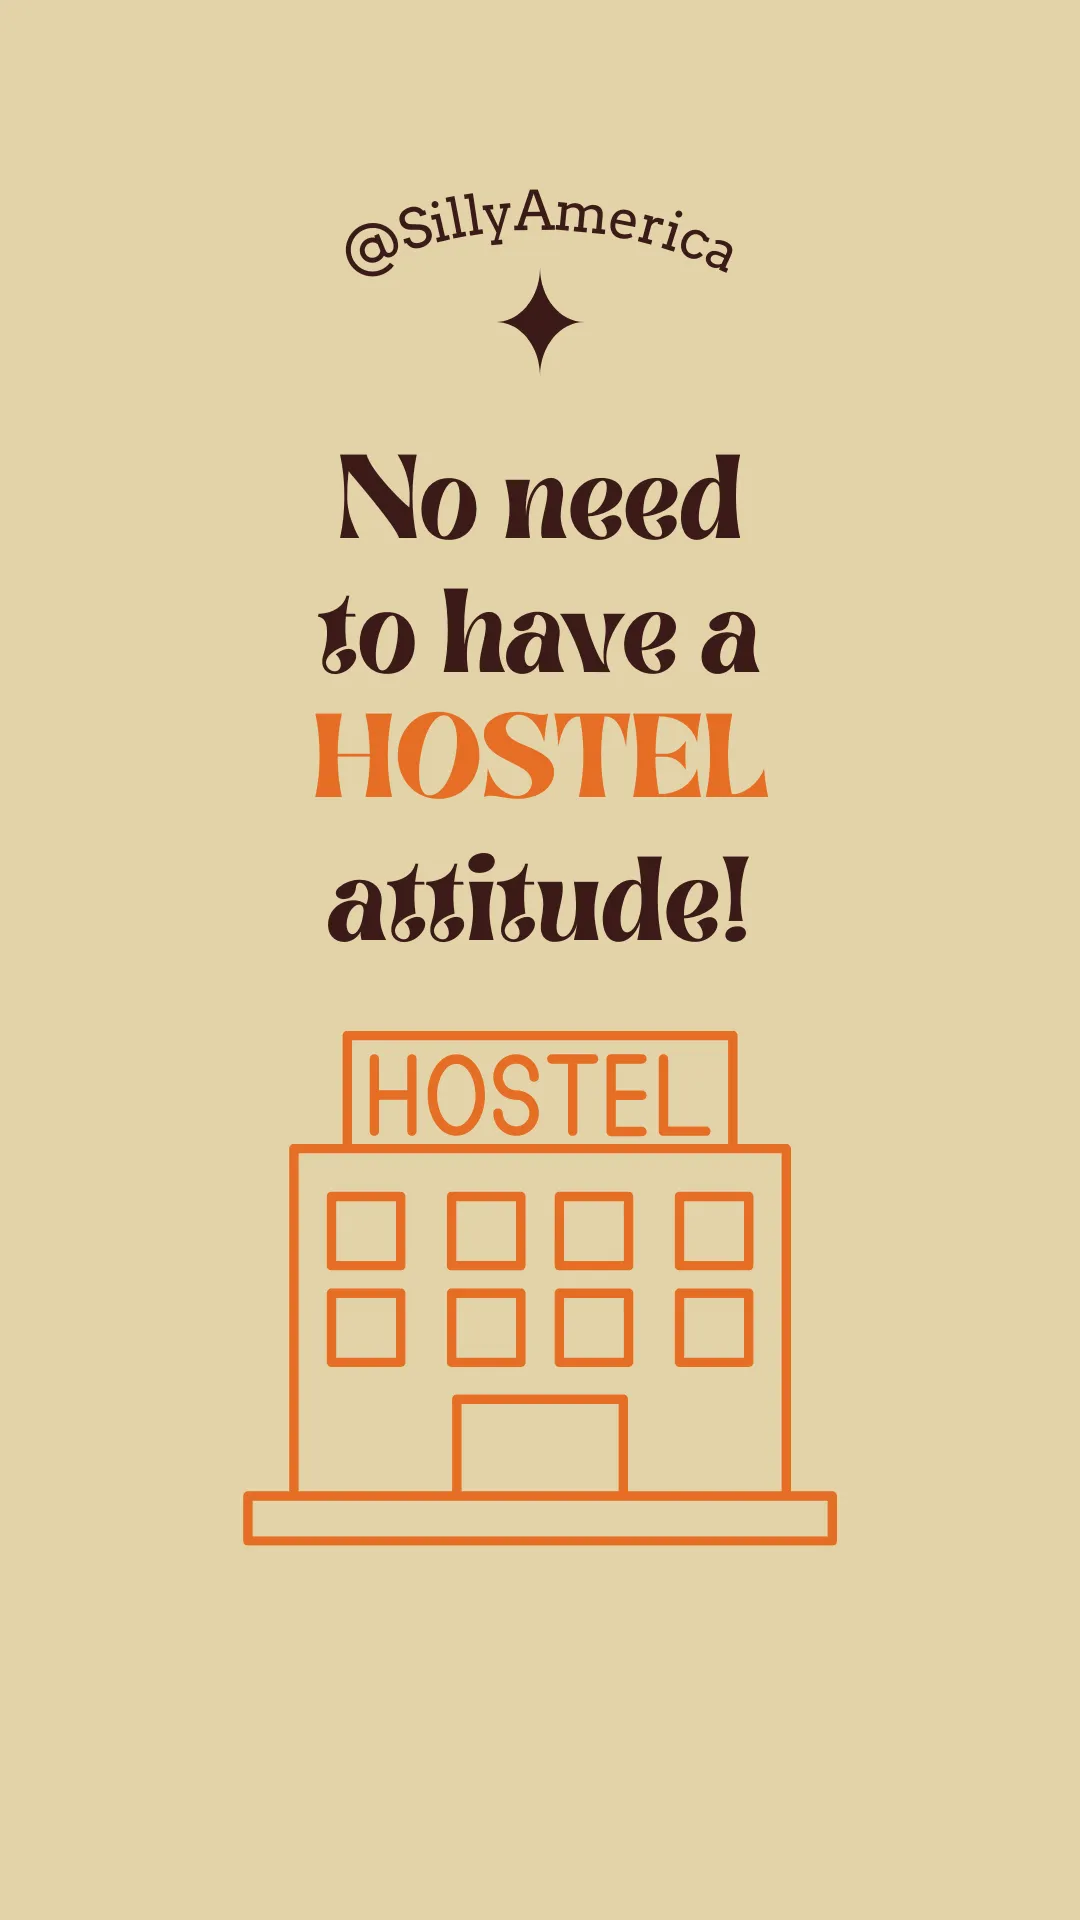 16 Funny Hotel Puns for Social Media - No need to have a HOSTEL attitude!